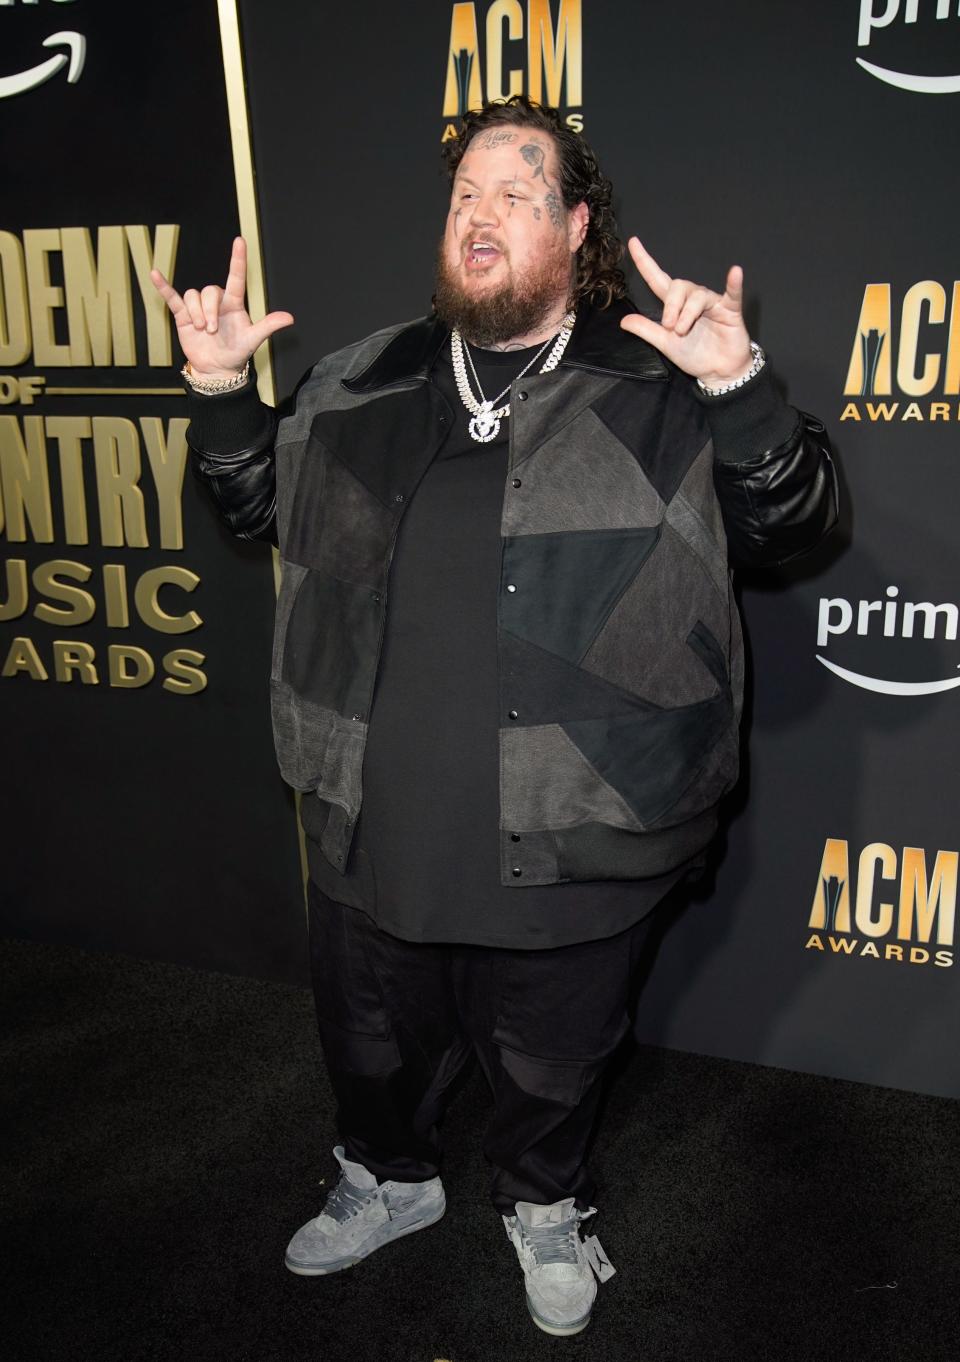 Jelly Roll arrives for the 58th ACM Awards at the Ford Center at the Star in Frisco Texas, on Thursday, May 11, 2023.